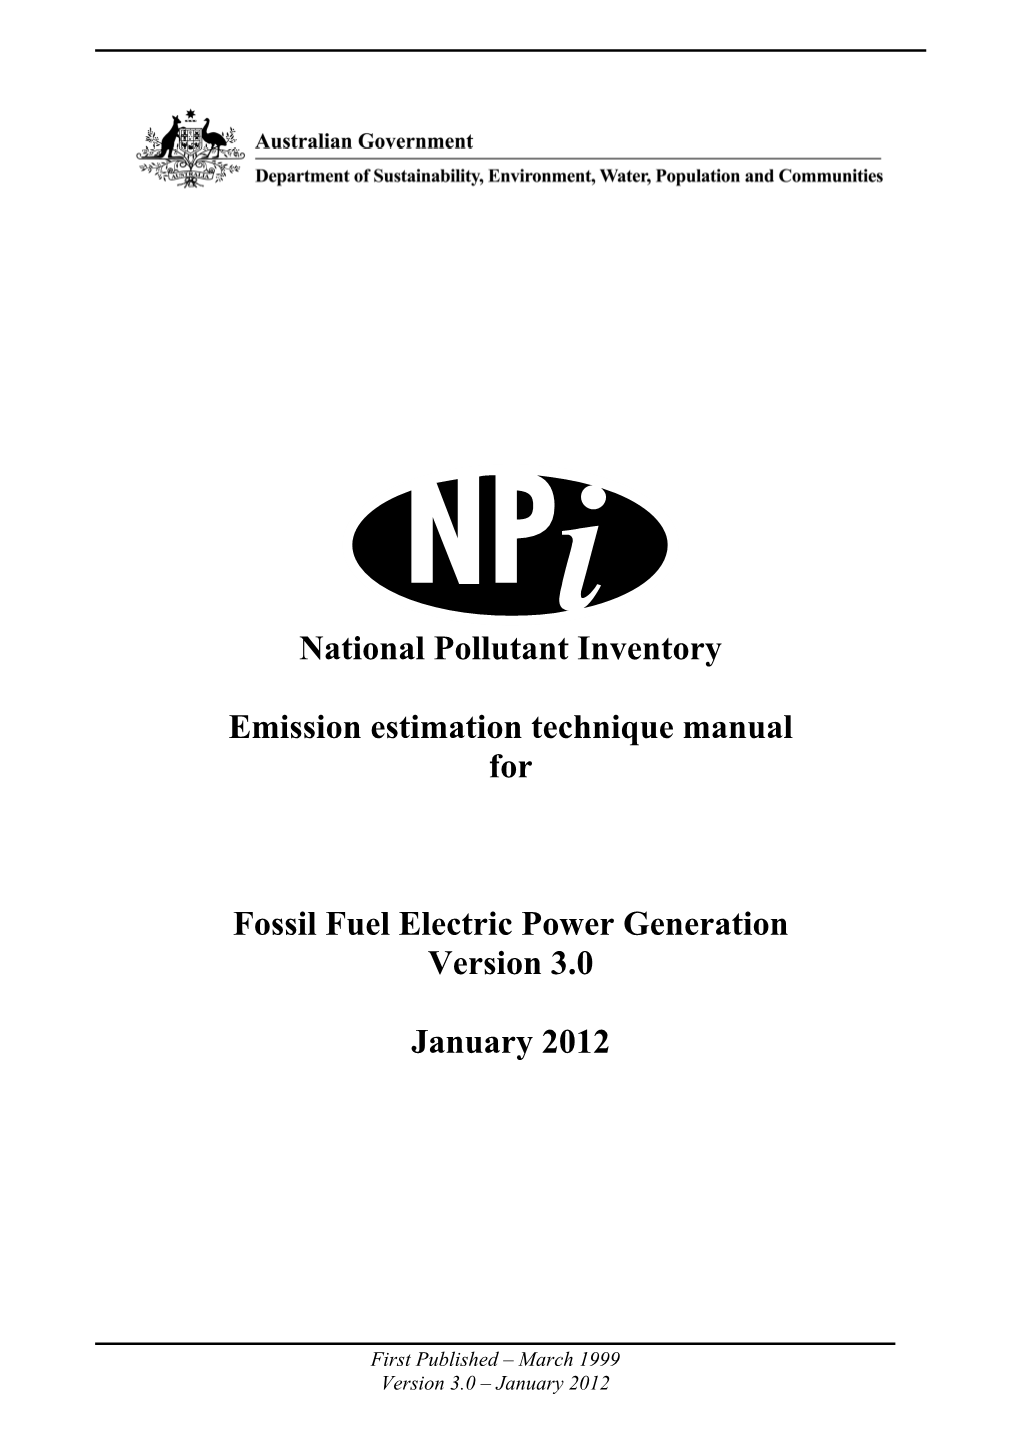 Emission Estimation Technique Manual for Fossil Fuel Electric Power Generation, Report to the Electricity Supply Association of Australia, 2002